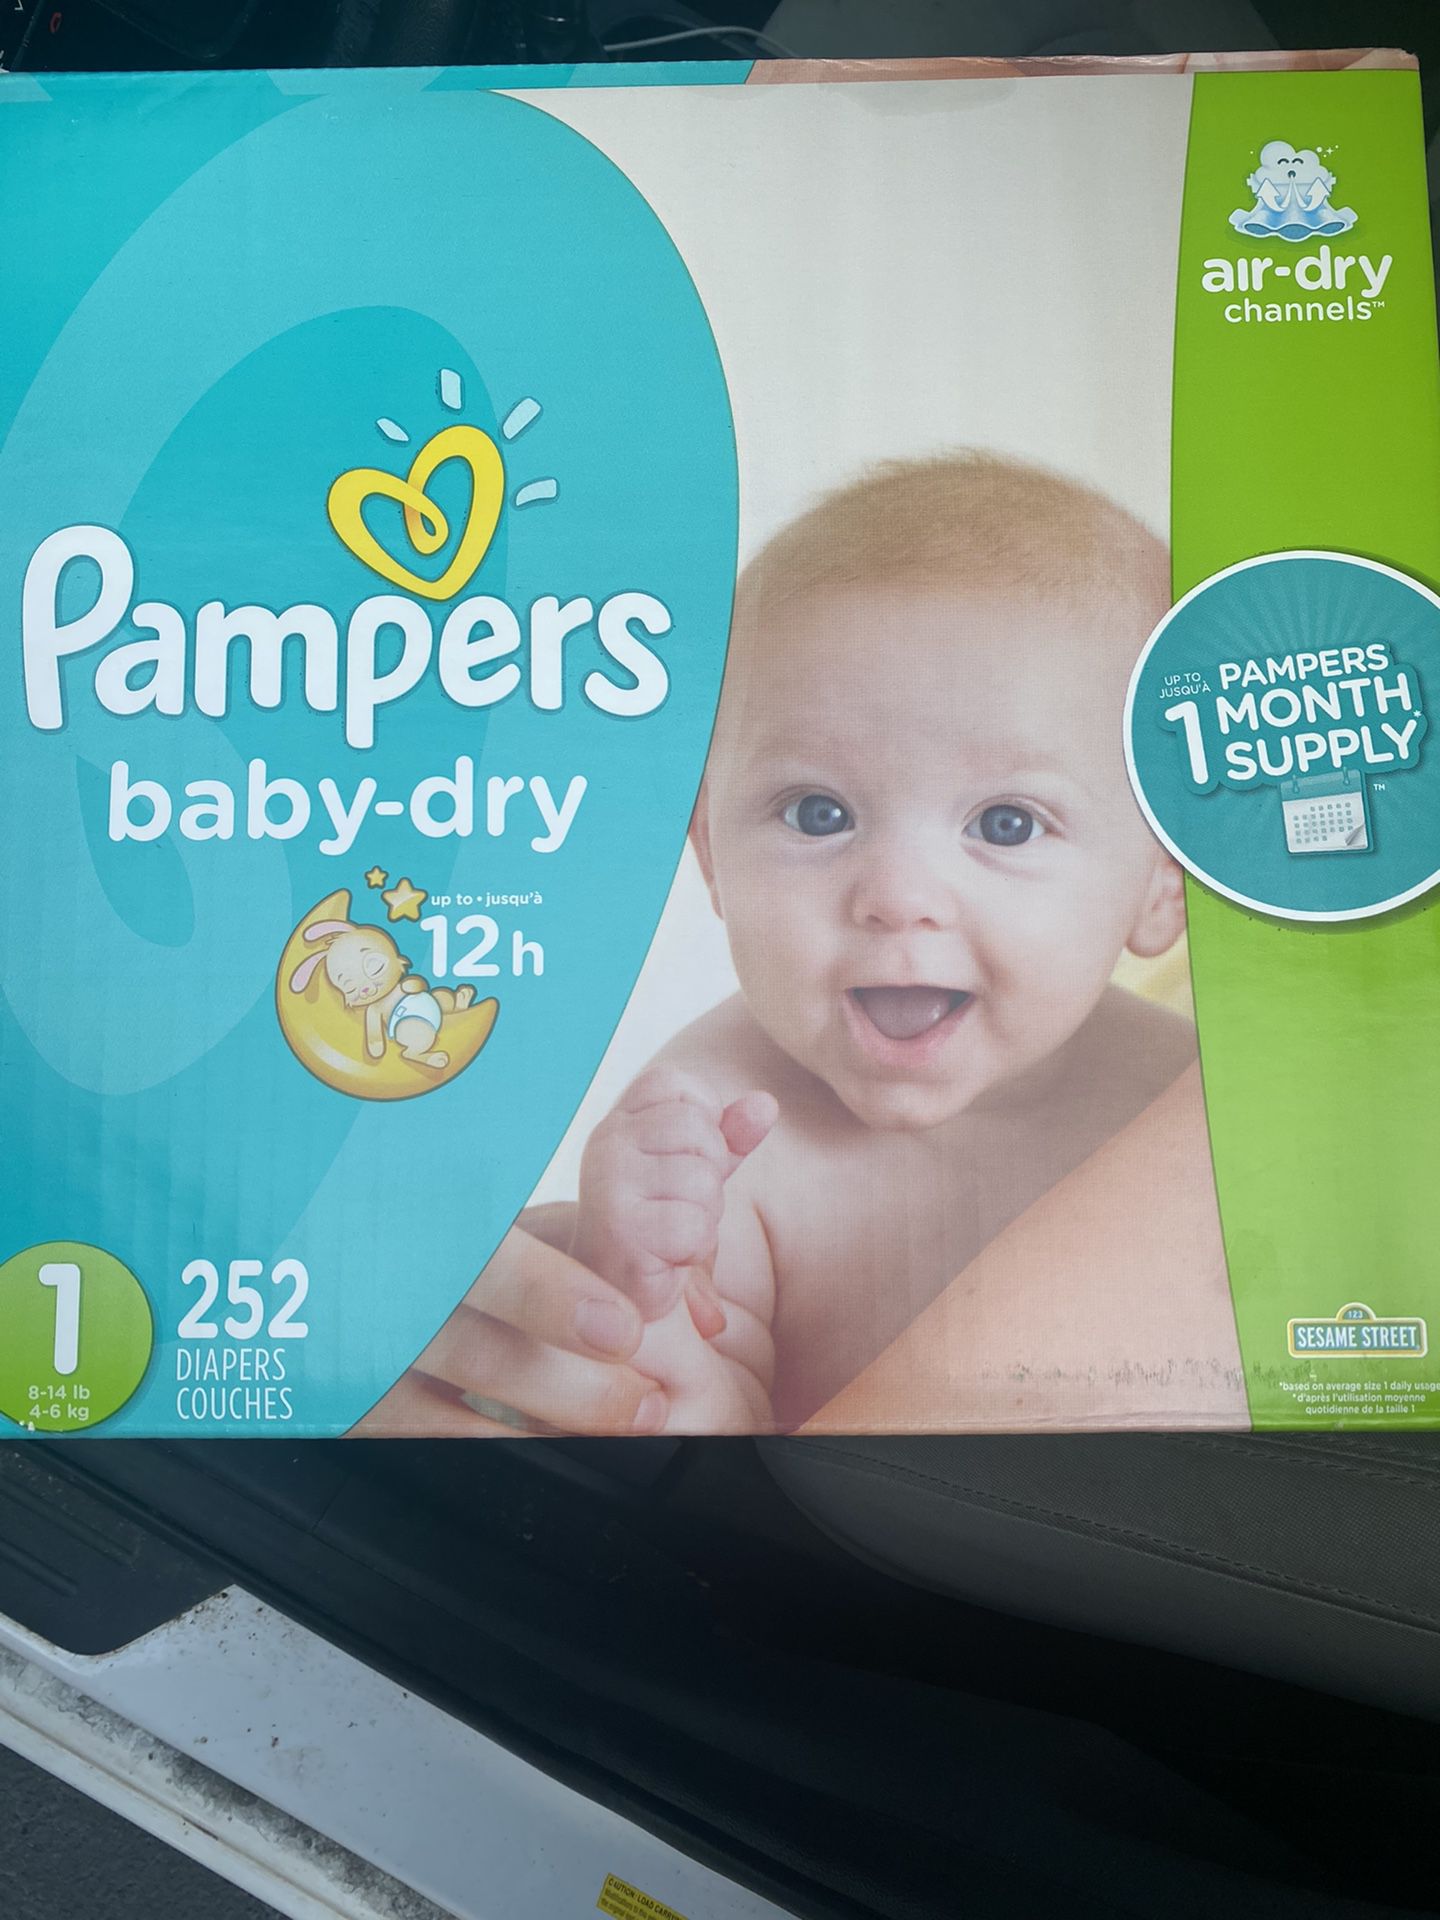 Pampers Size 1 Month Supply